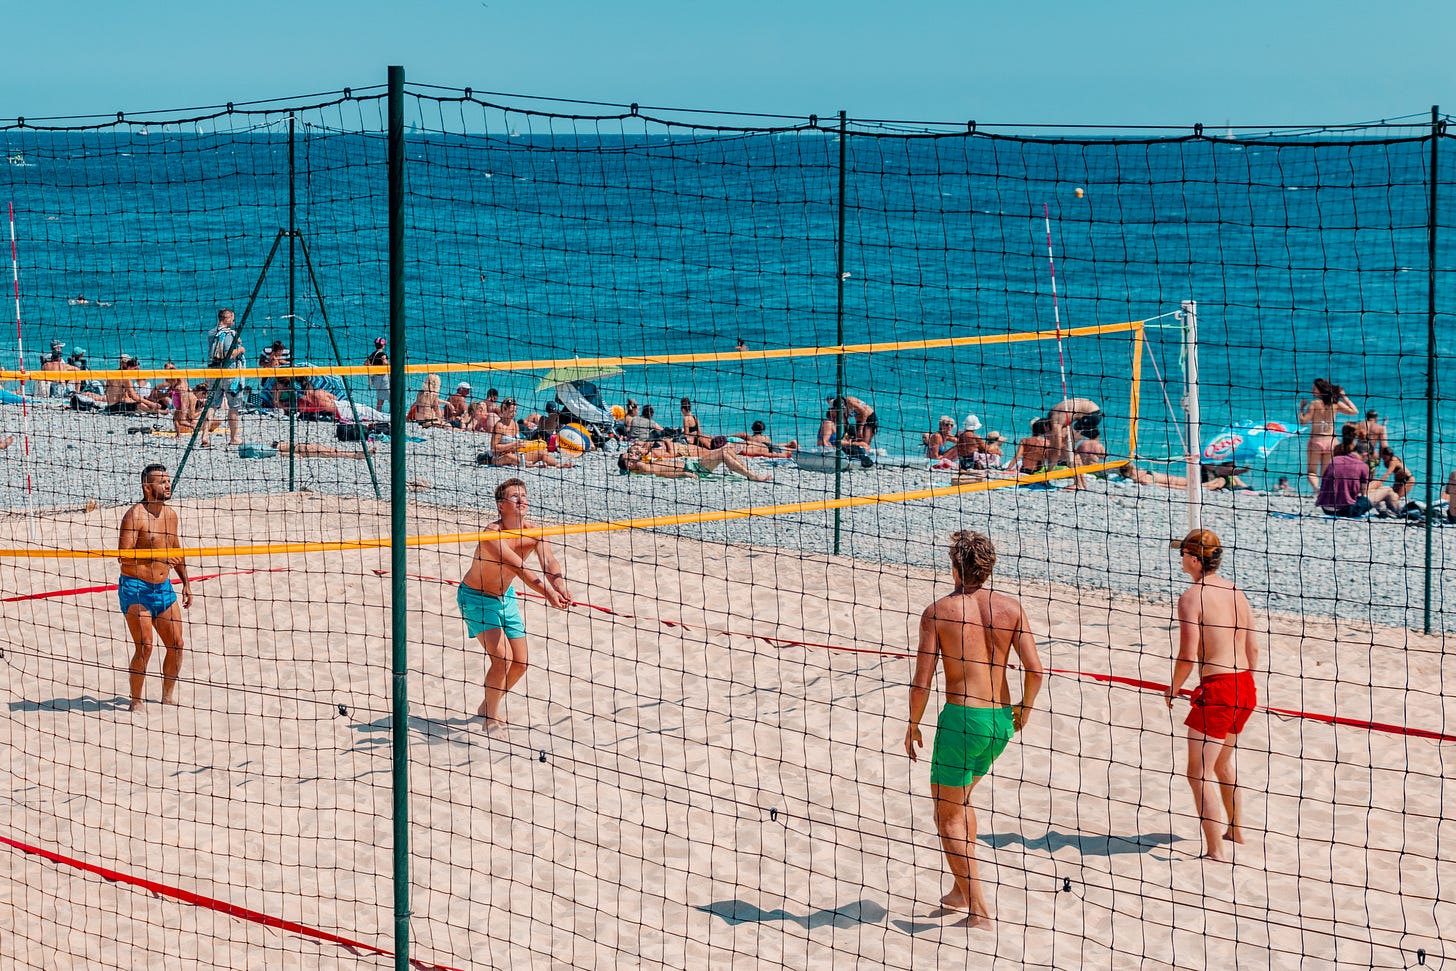 Men playing beach volleyball in Cote D’Azur: A photo by David Elikwu